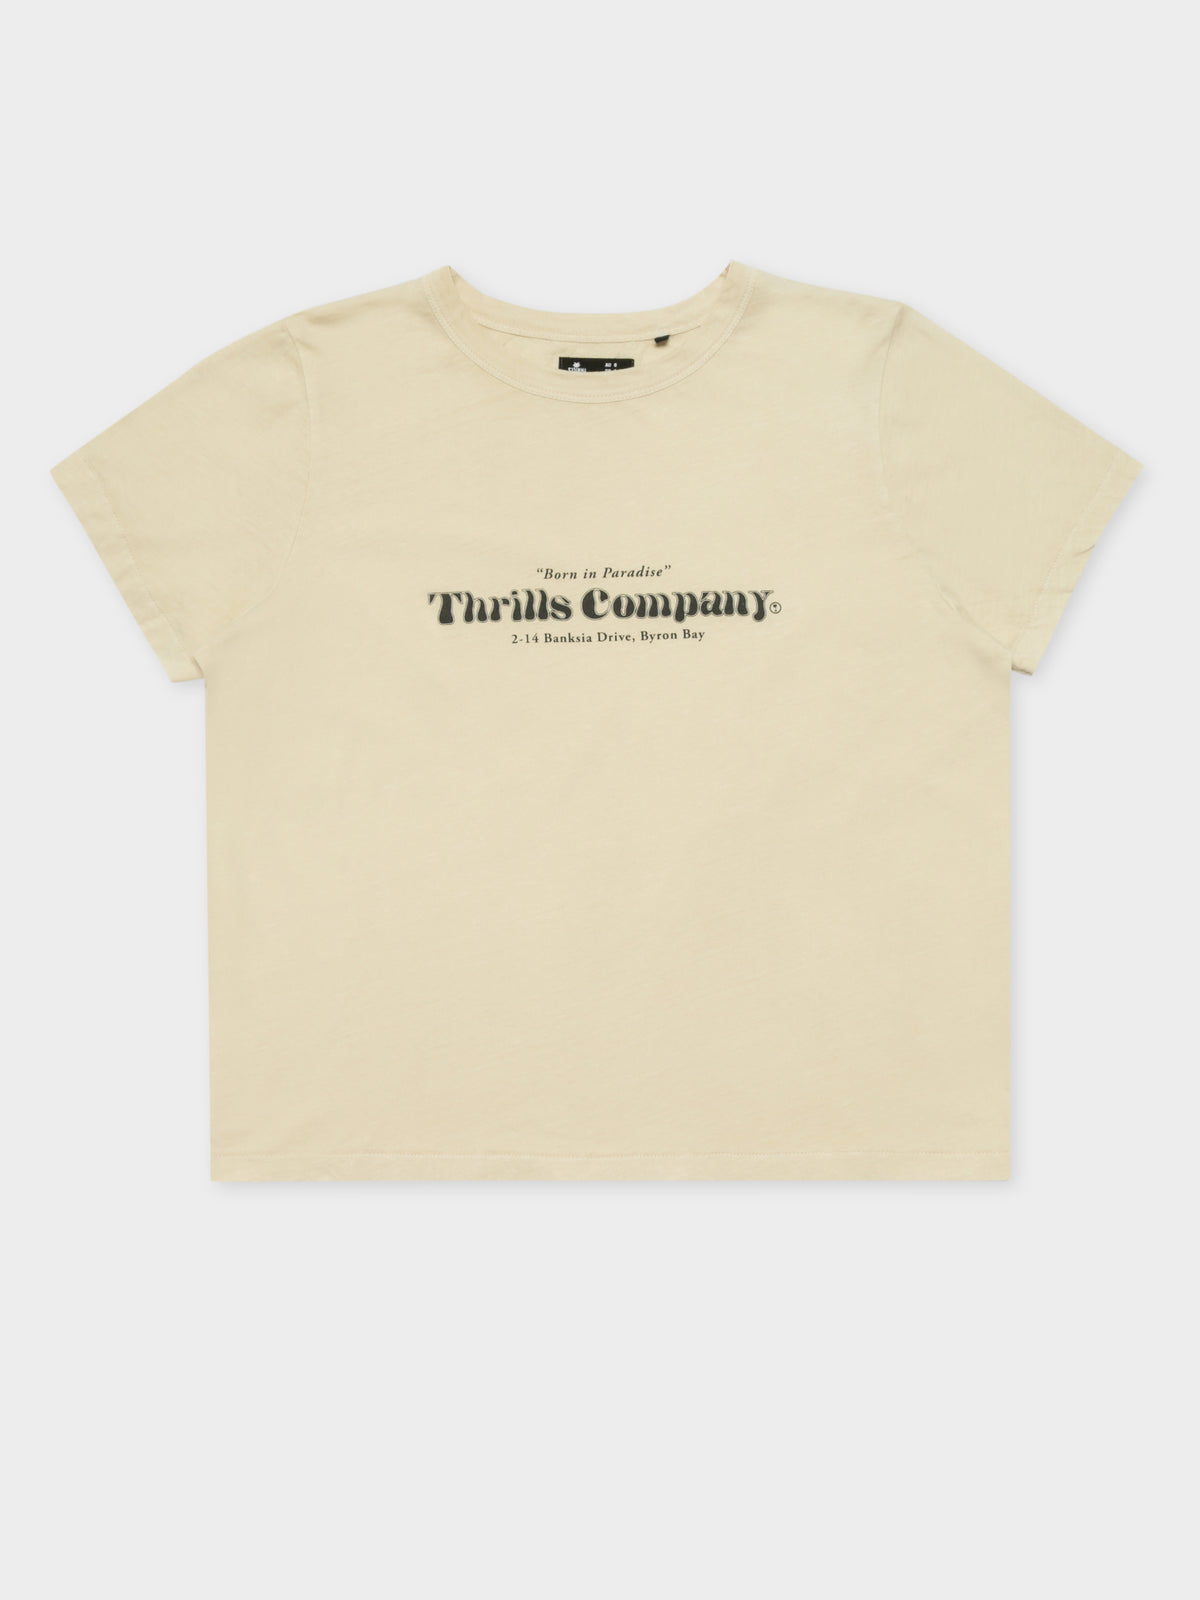 Silo Relaxed T-Shirt in Thrift White